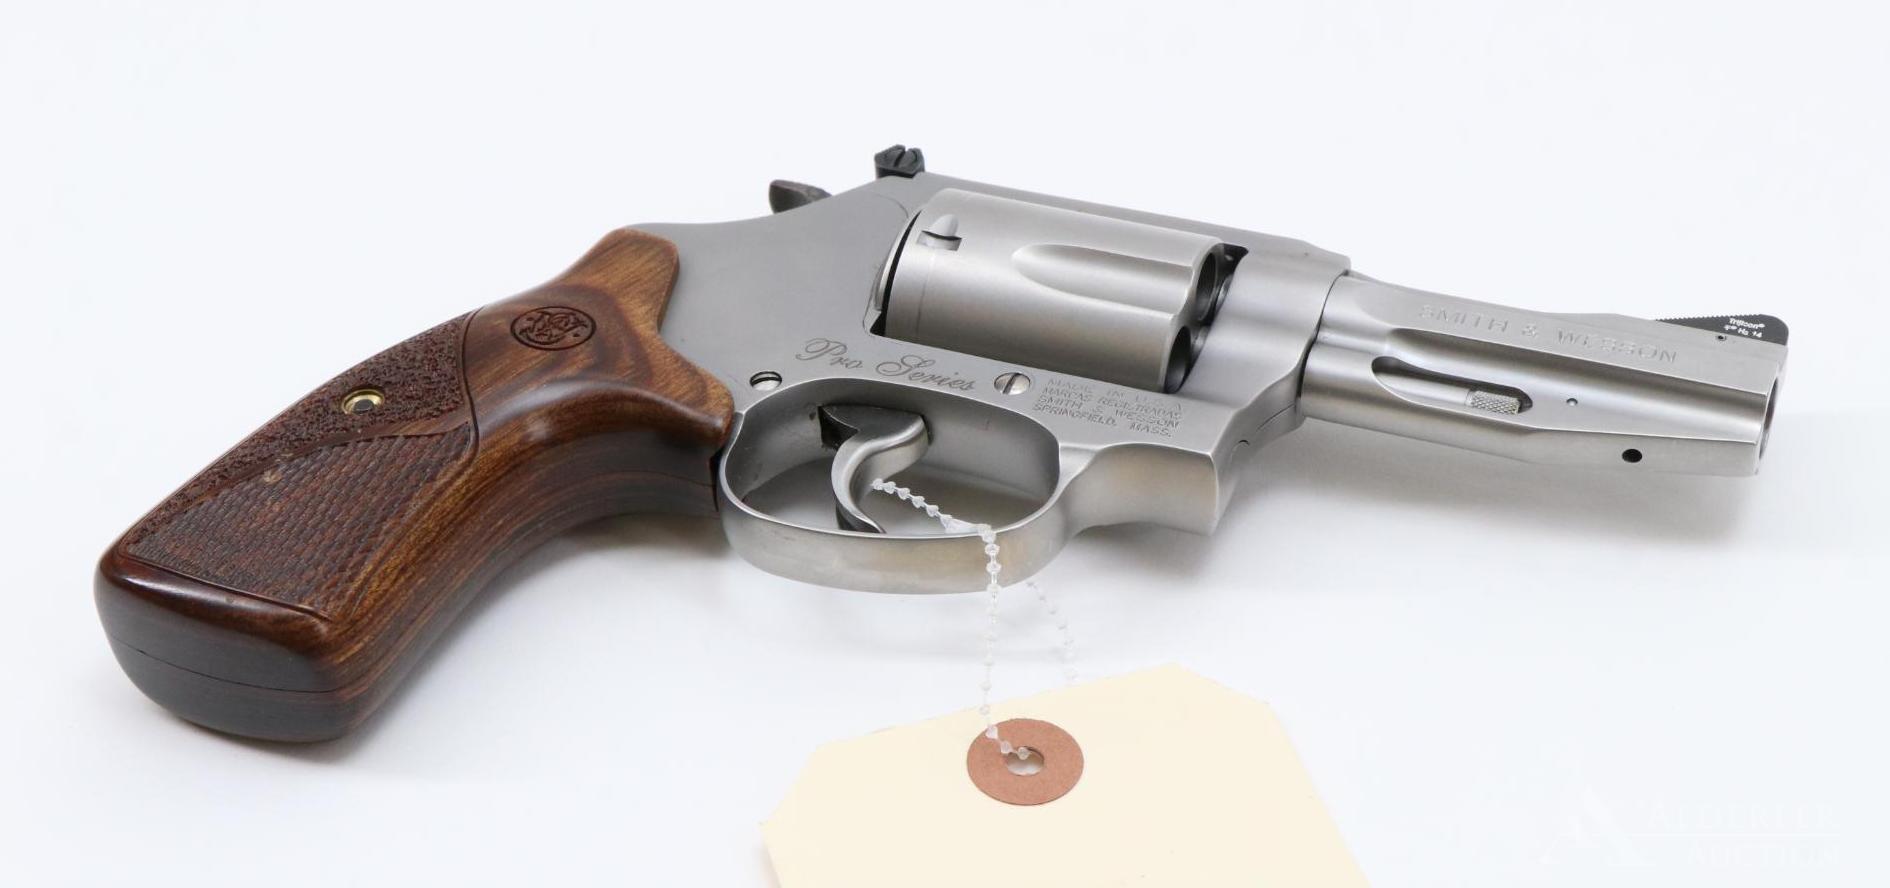 Smith & Wesson 60-16 Pro Series Double Action Revolver